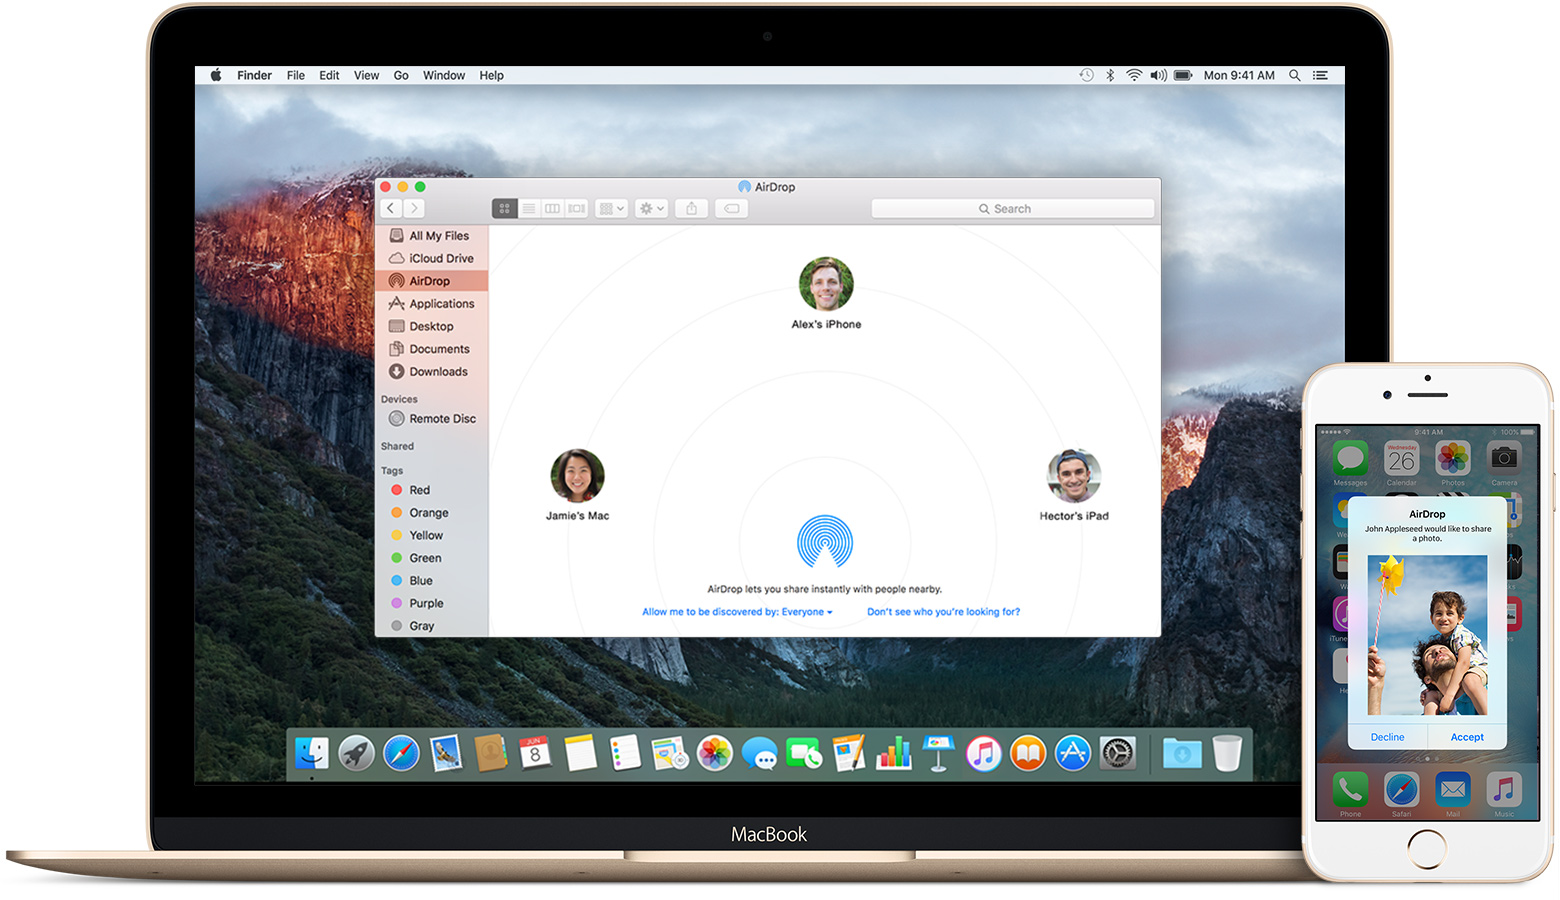 MacBook and iPhone showing AirDrop working between them